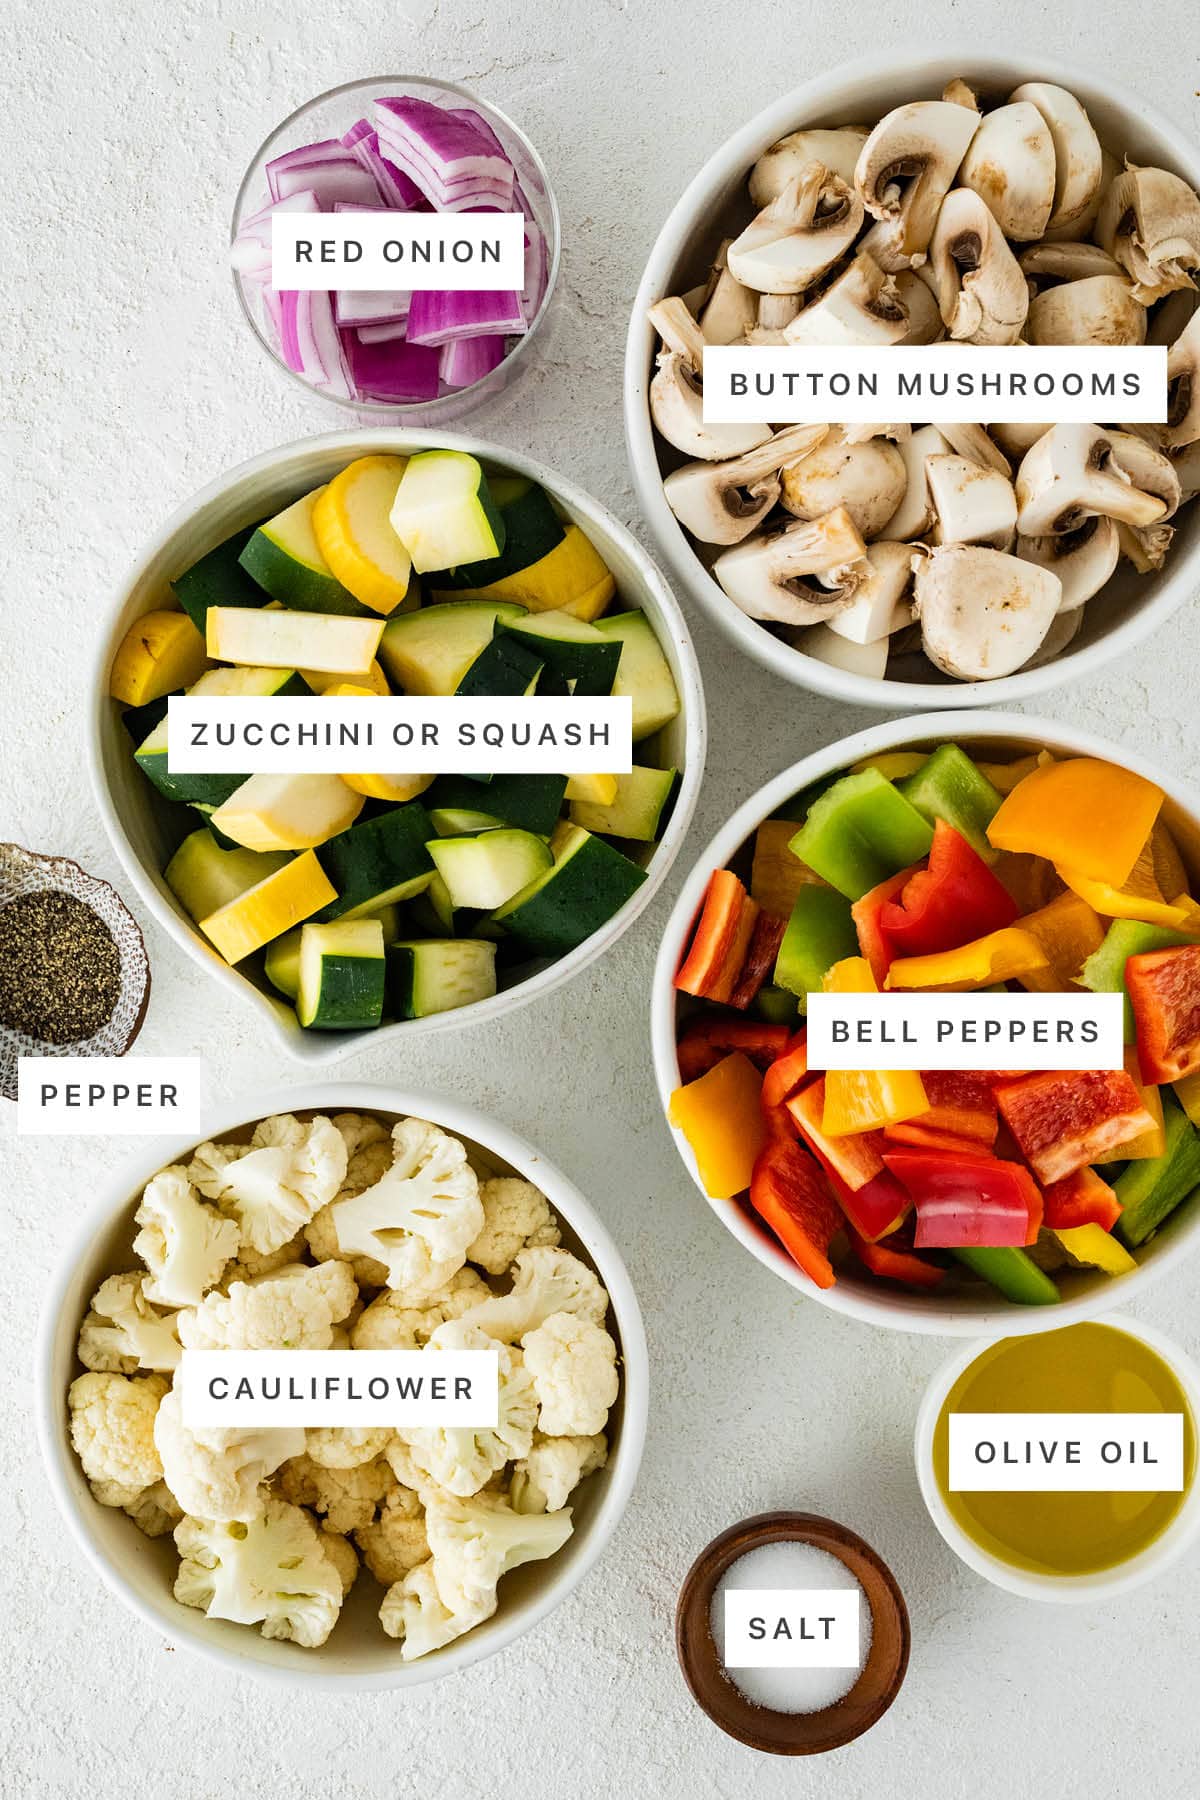 Ingredients measured out to make Air Fryer Vegetables: red onion, button mushrooms, zucchini, squash, pepper, bell peppers, cauliflower and salt.